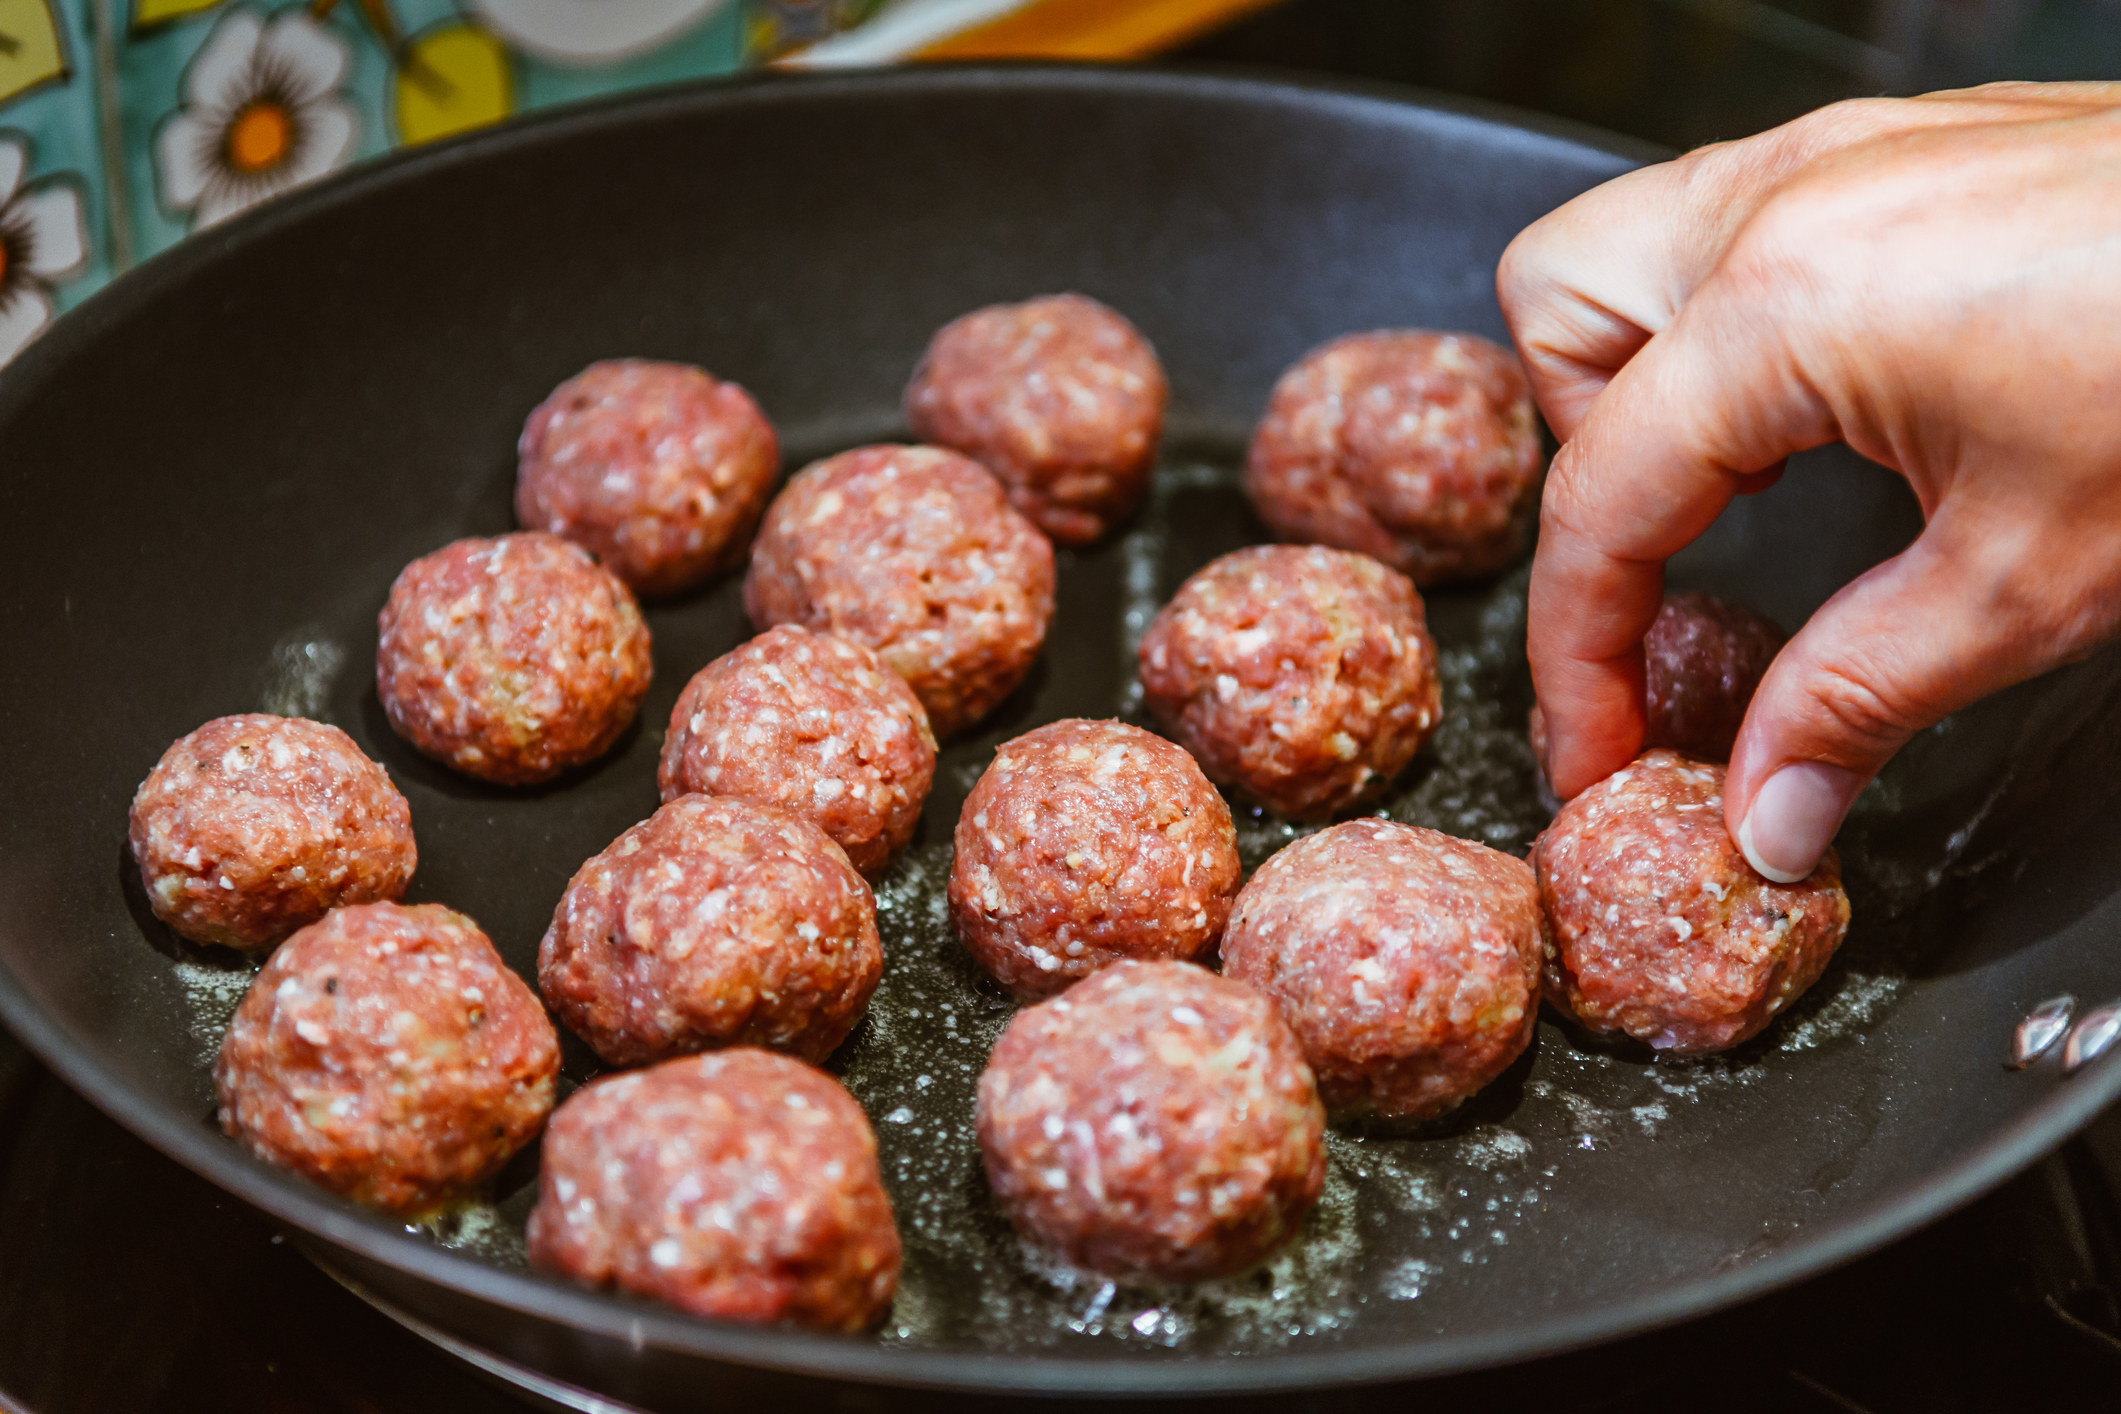 Placing raw meatballs into a frying pan.